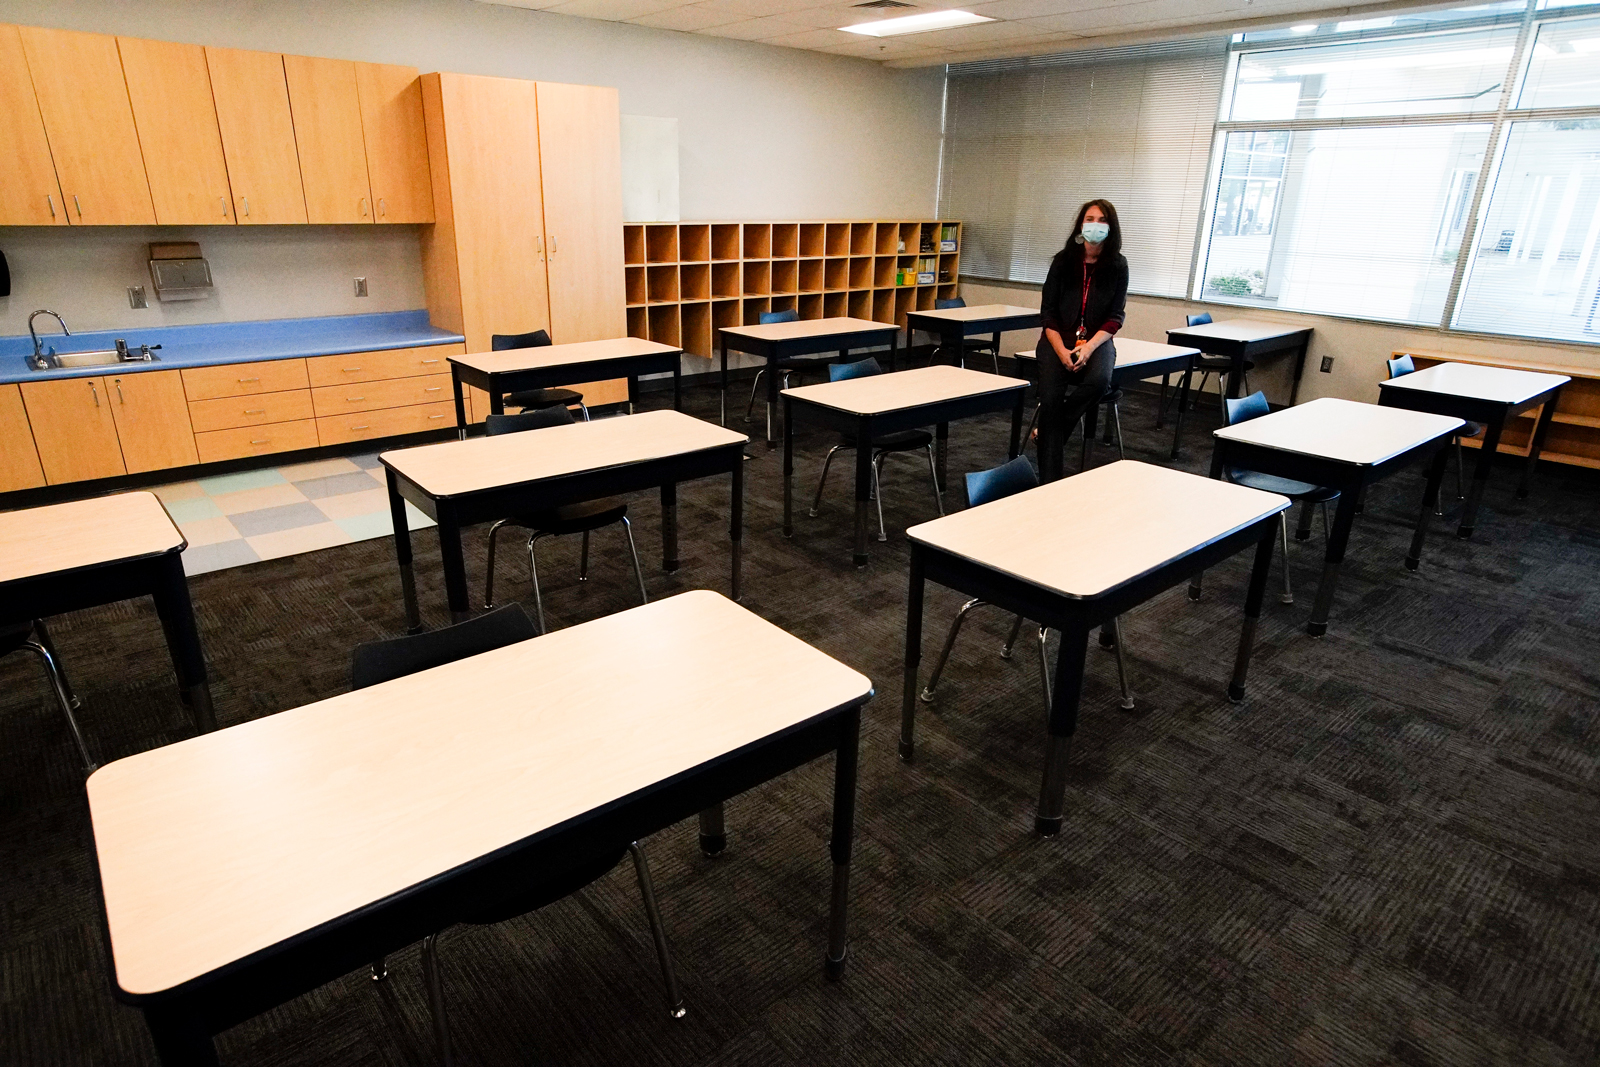 Principal Susan Stevens talks to the media during a demonstration of a socially-distanced classroom at A.J. Whittenberg Elementary School of Engineering Monday, July 20, in Greenville, South Carolina.